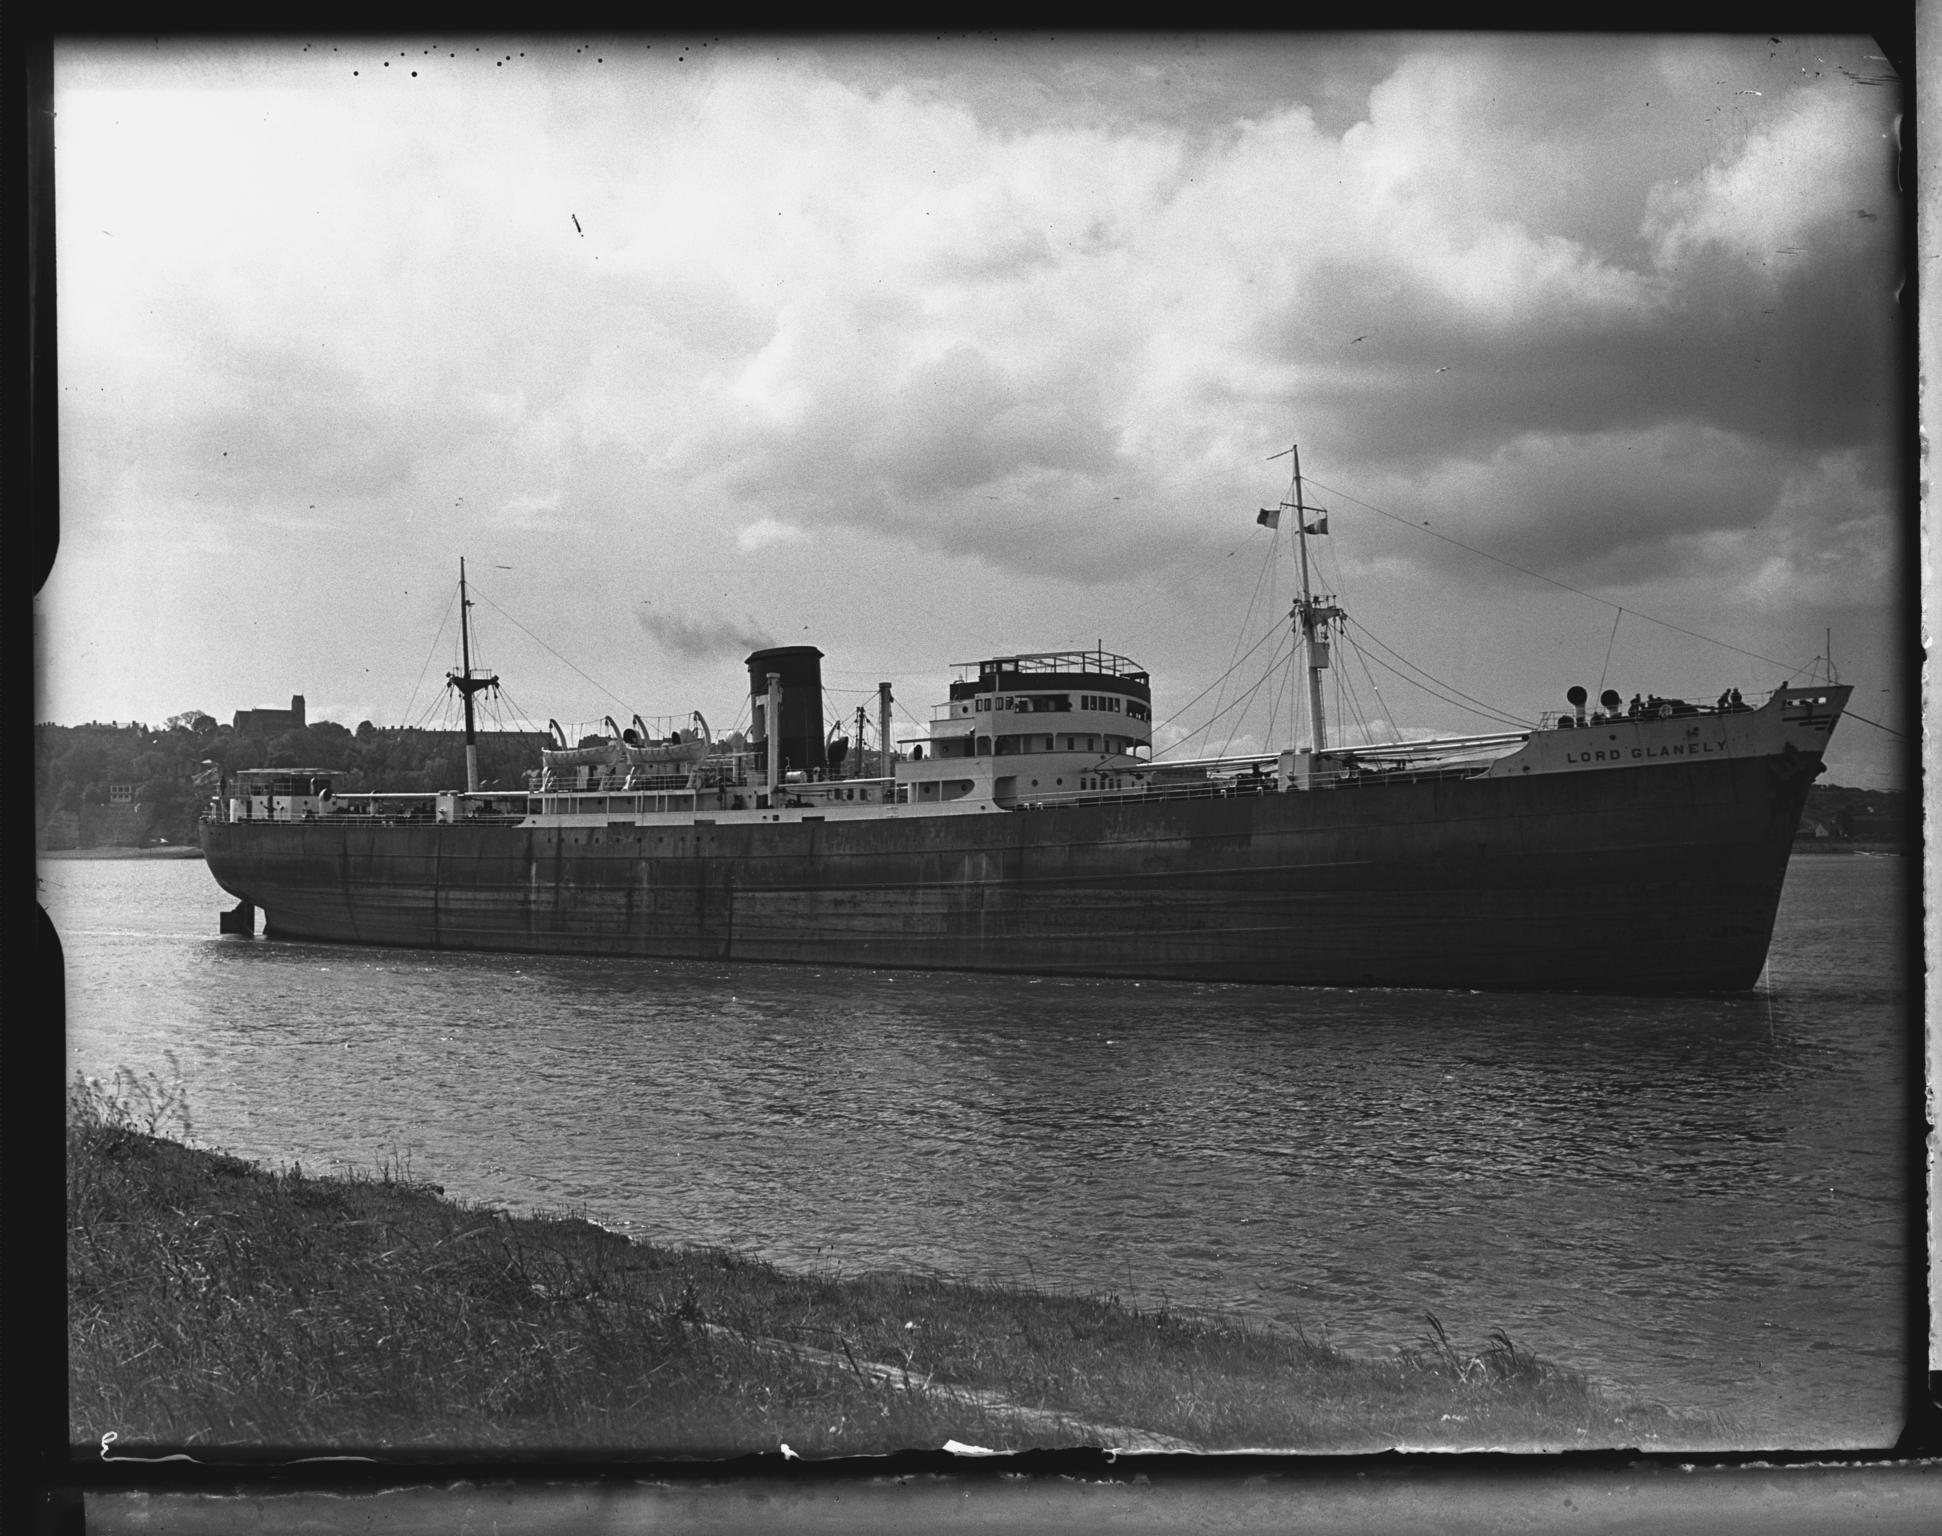 S.S. LORD GLANELY, glass negative